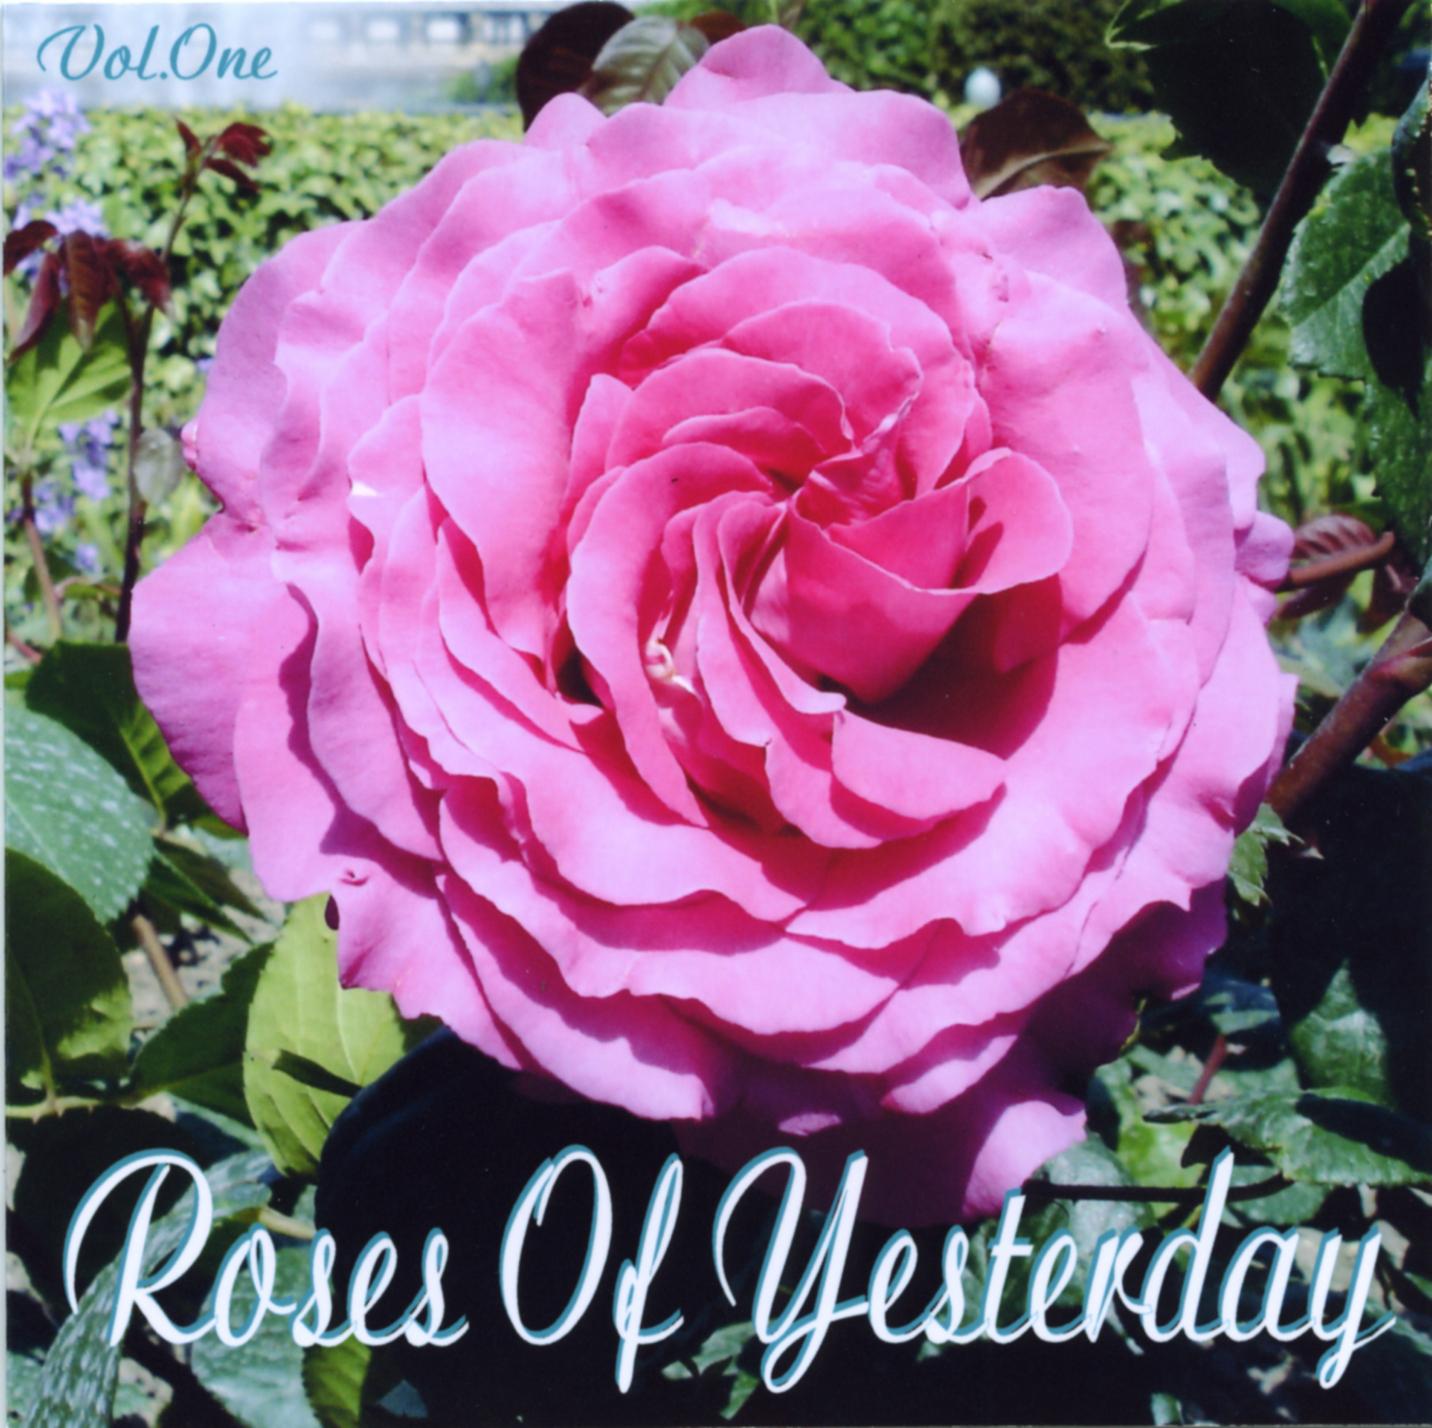 Roses of Yesterday, Vol. 1